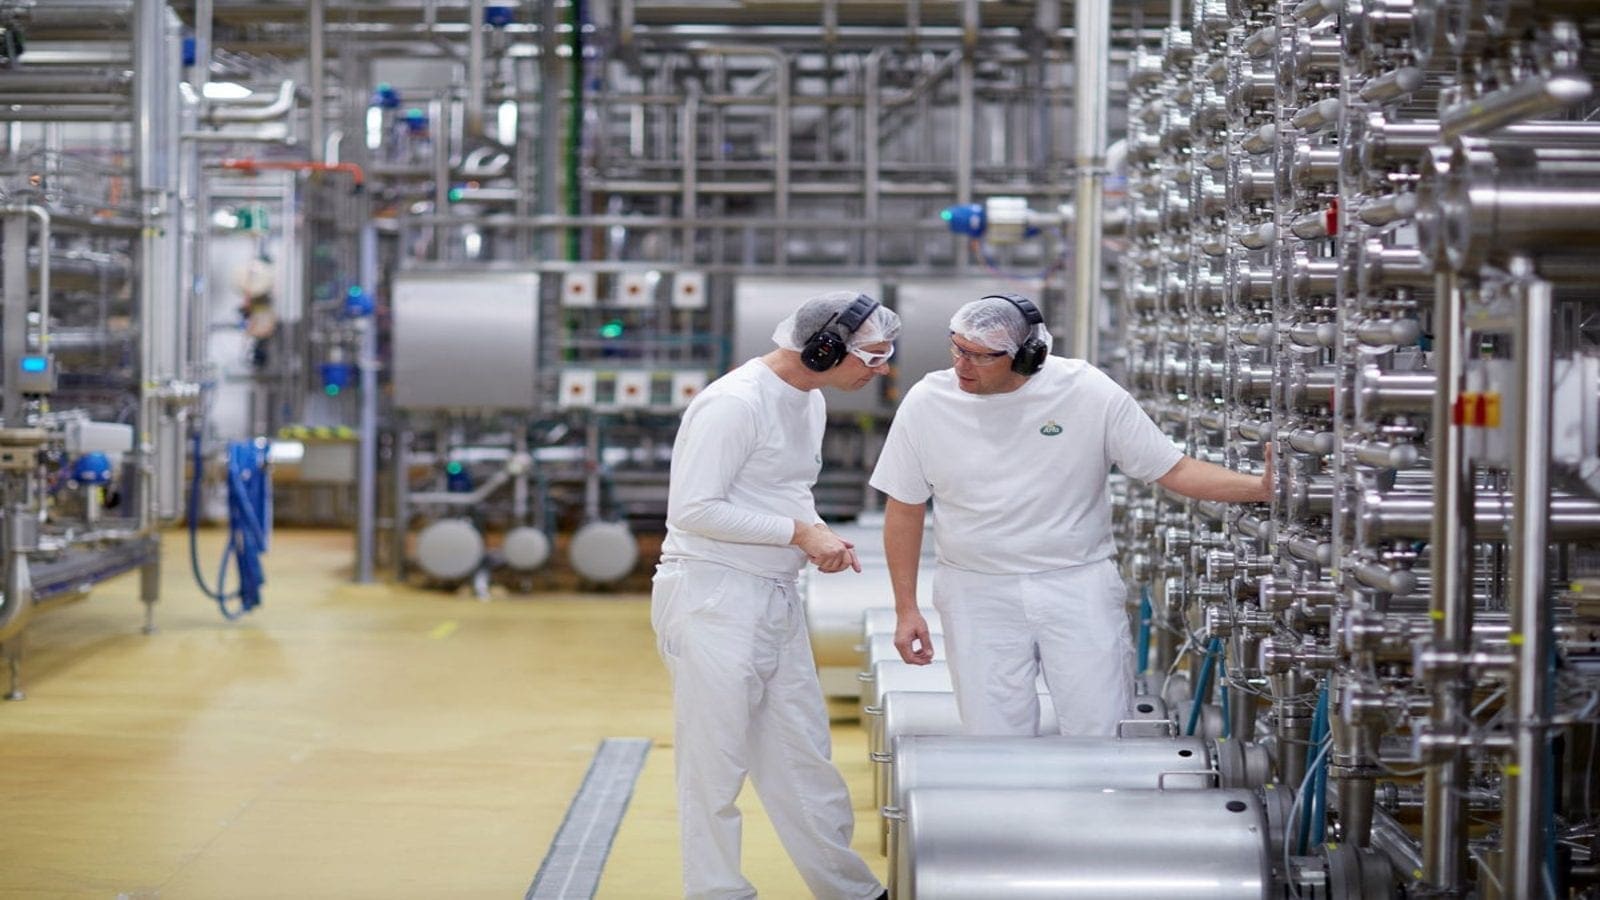 Arla’s global ingredients business poised for growth following partnership with Dale Farms